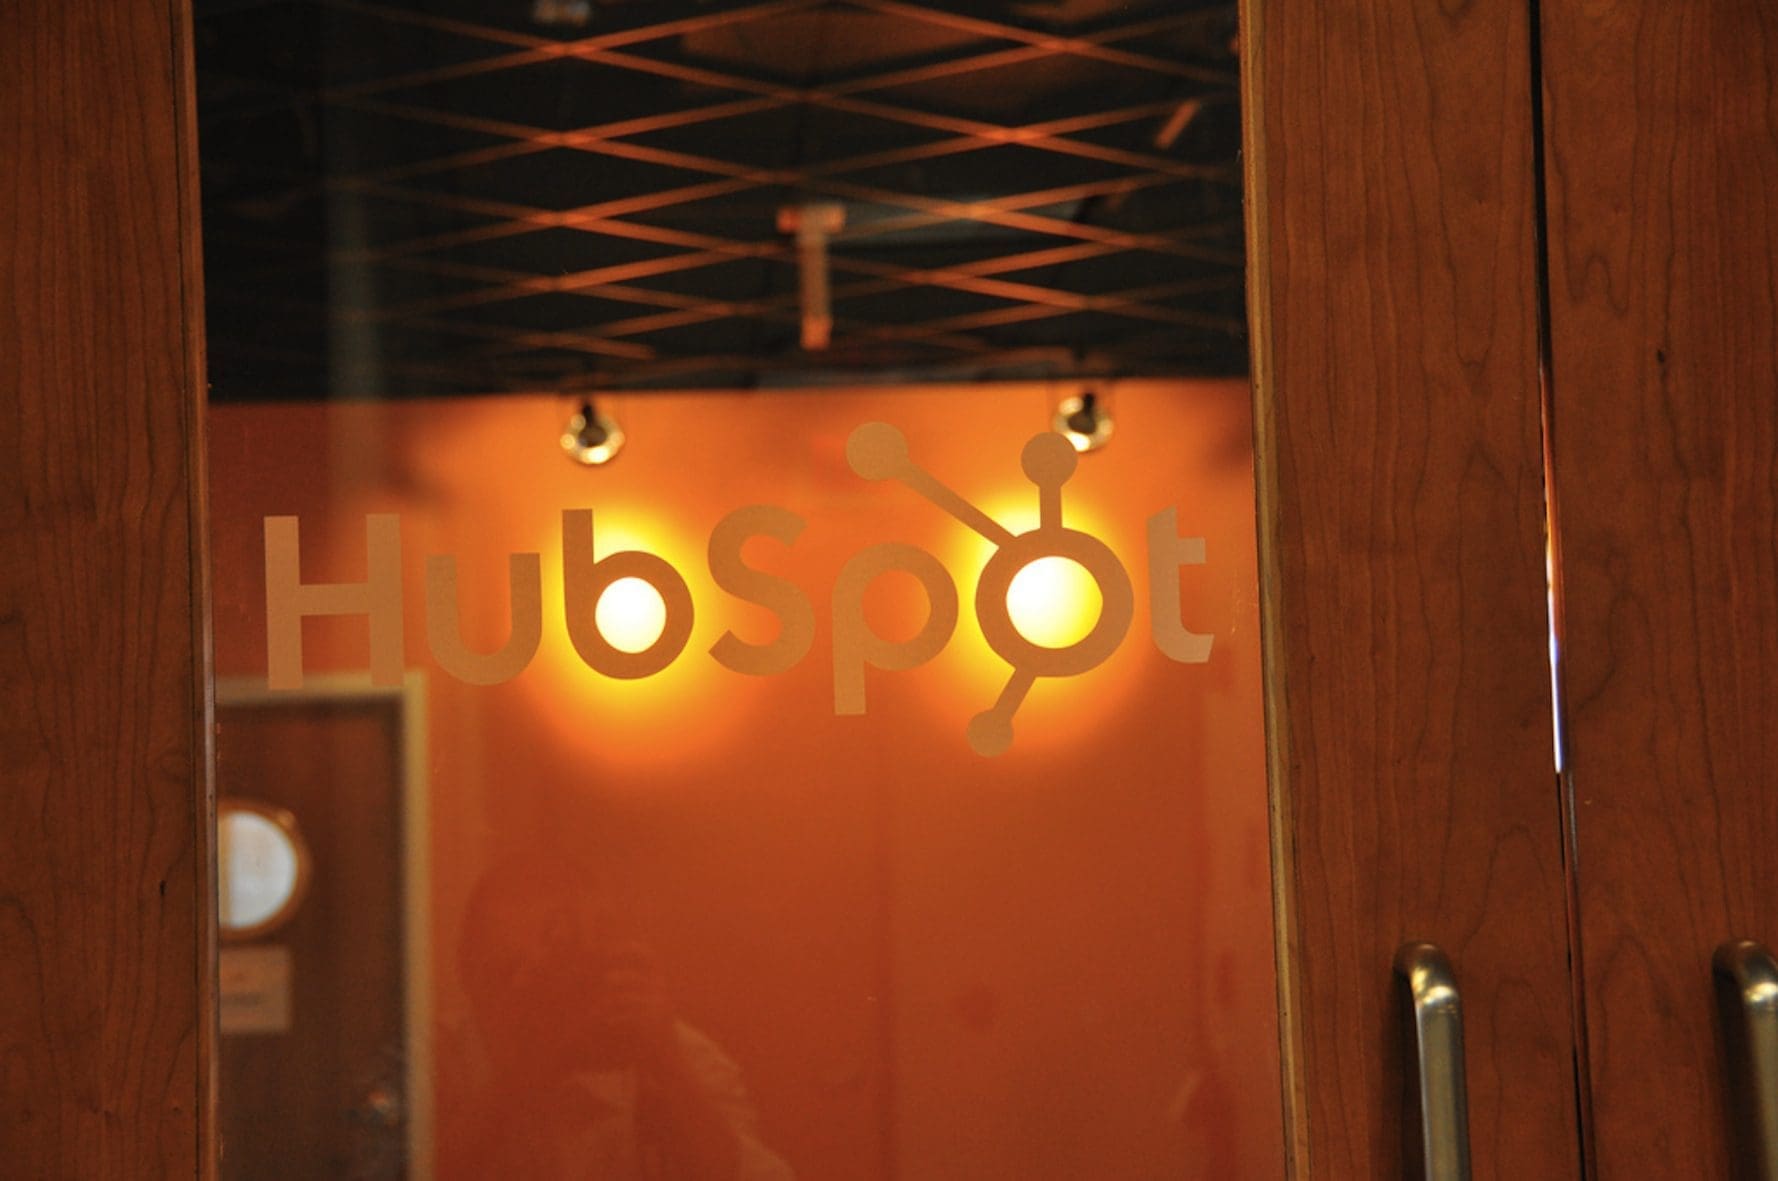 hubspot review: is it worth the money